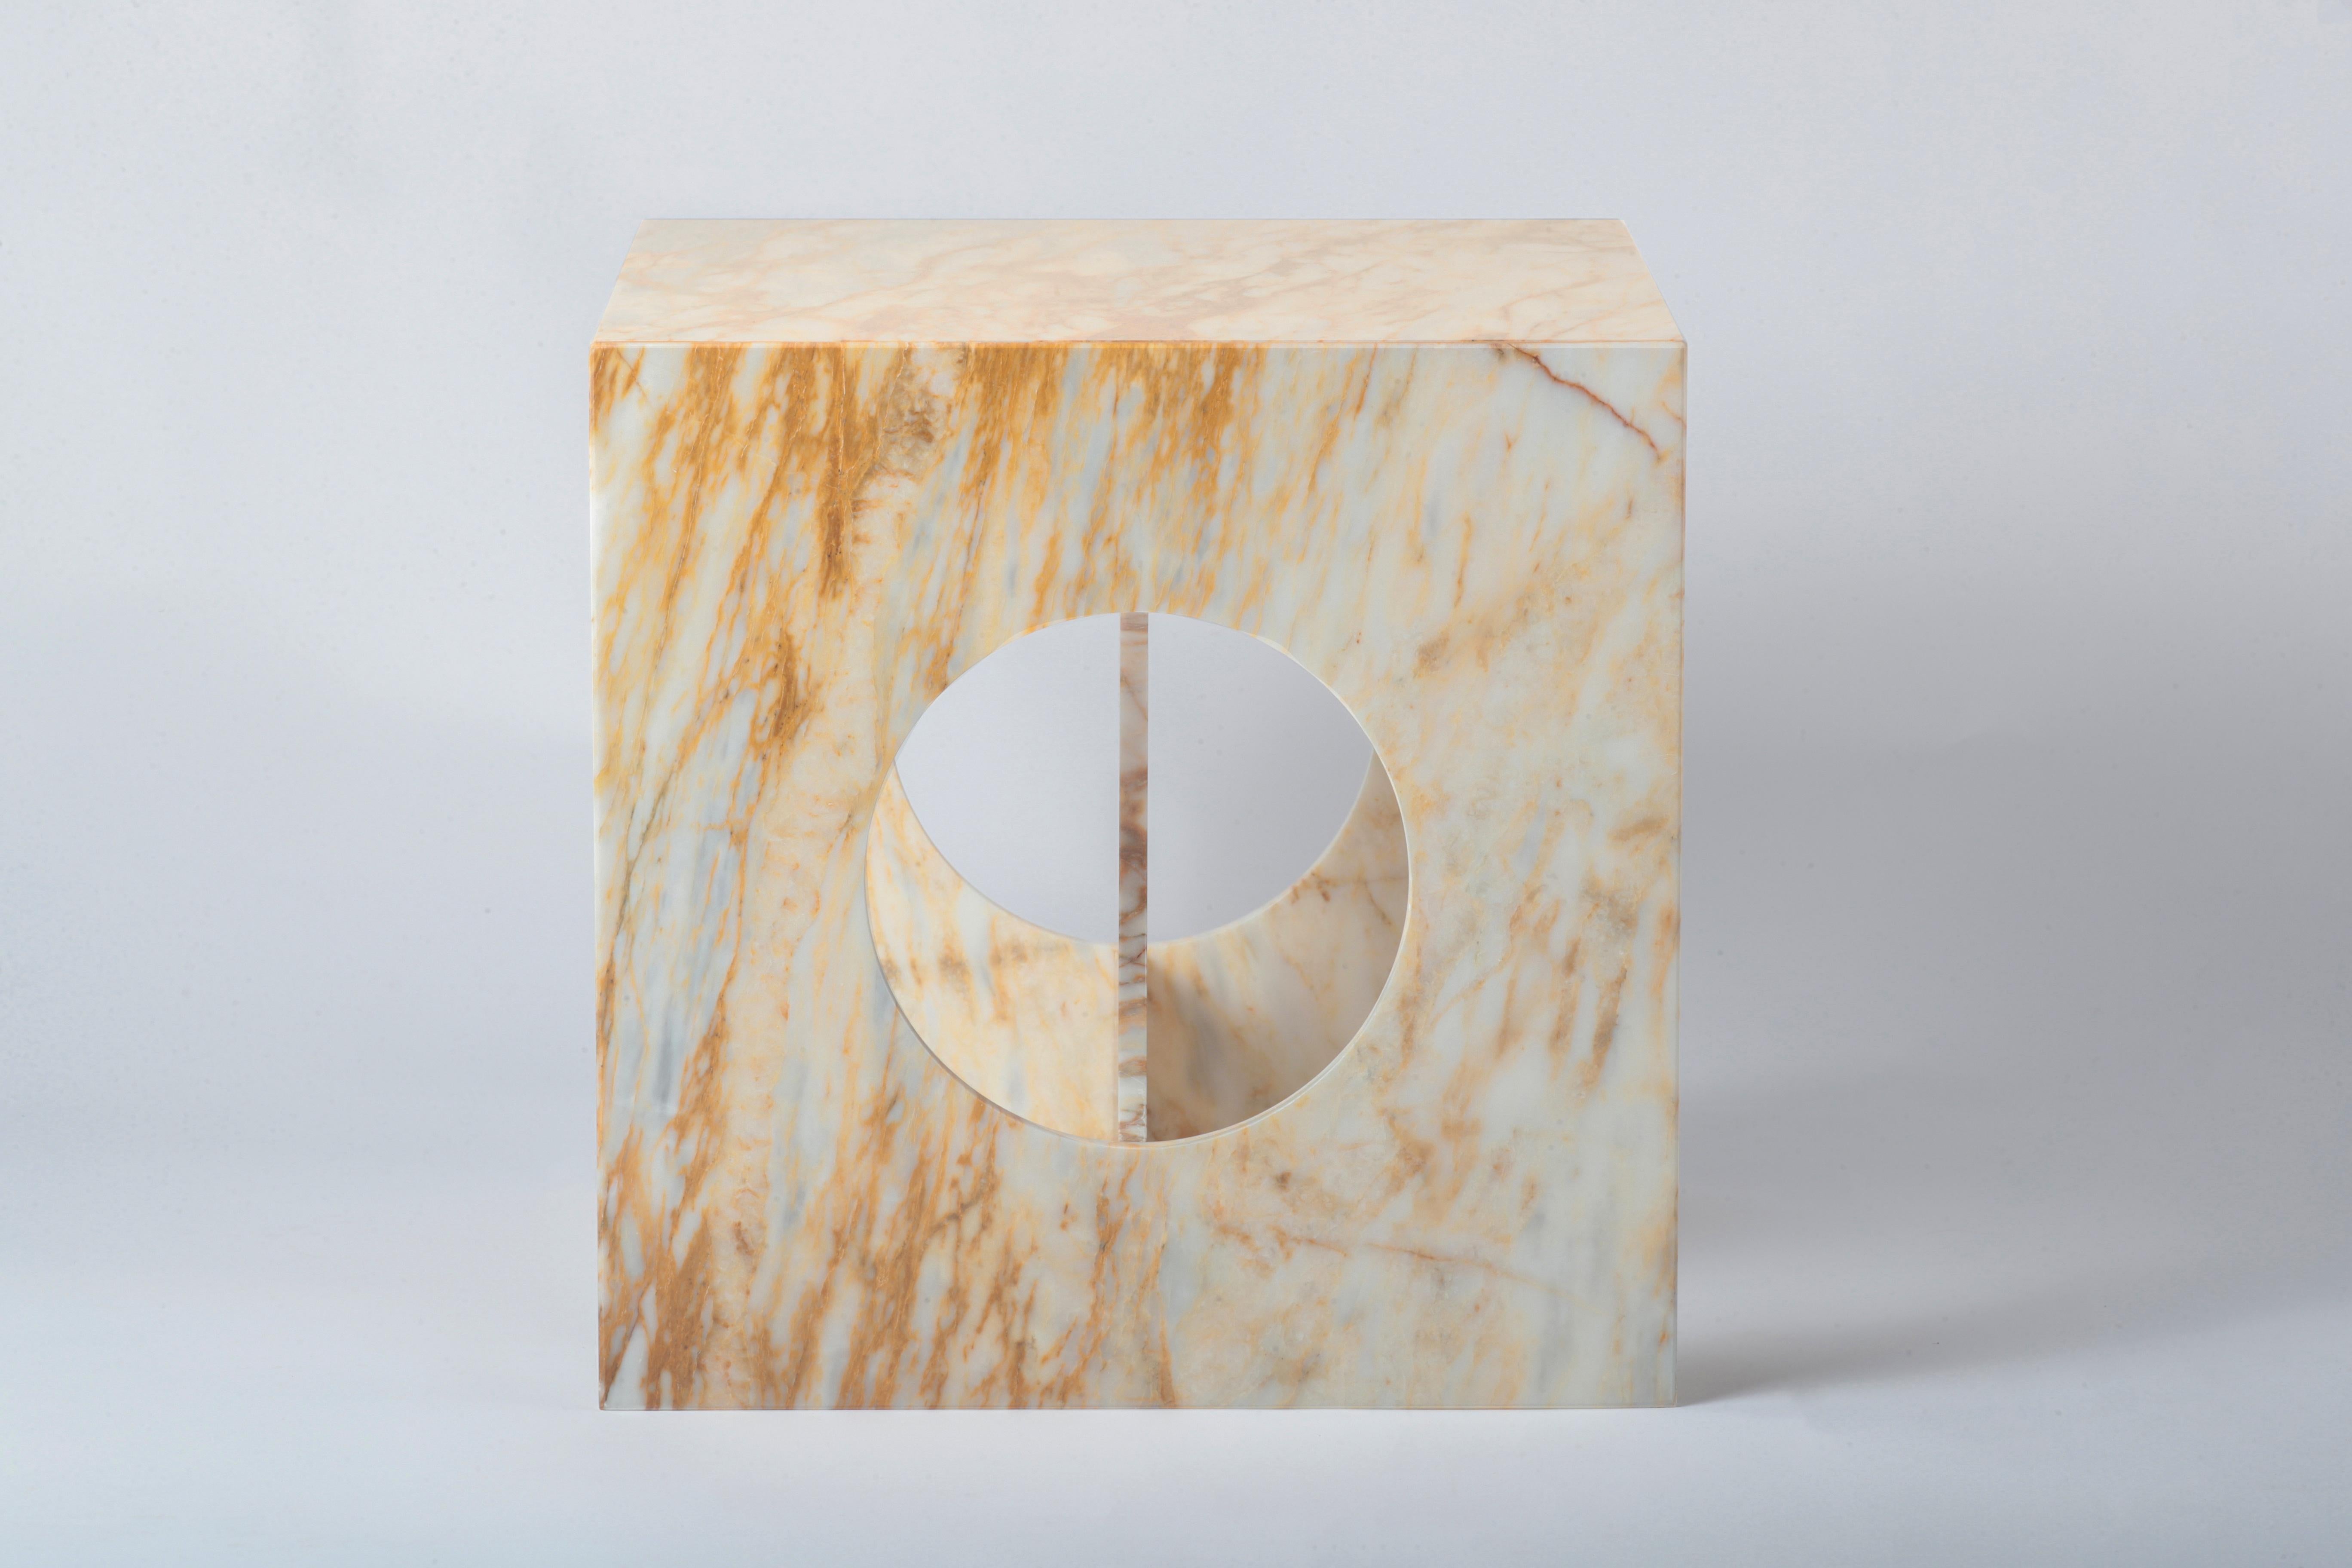 The perfect shape cube becomes more characterized by the voids inside. While lightening the marble, the circle voids also provide ease of use and make it easier to carry it around. It will change the dynamics of the space with its unique form. You